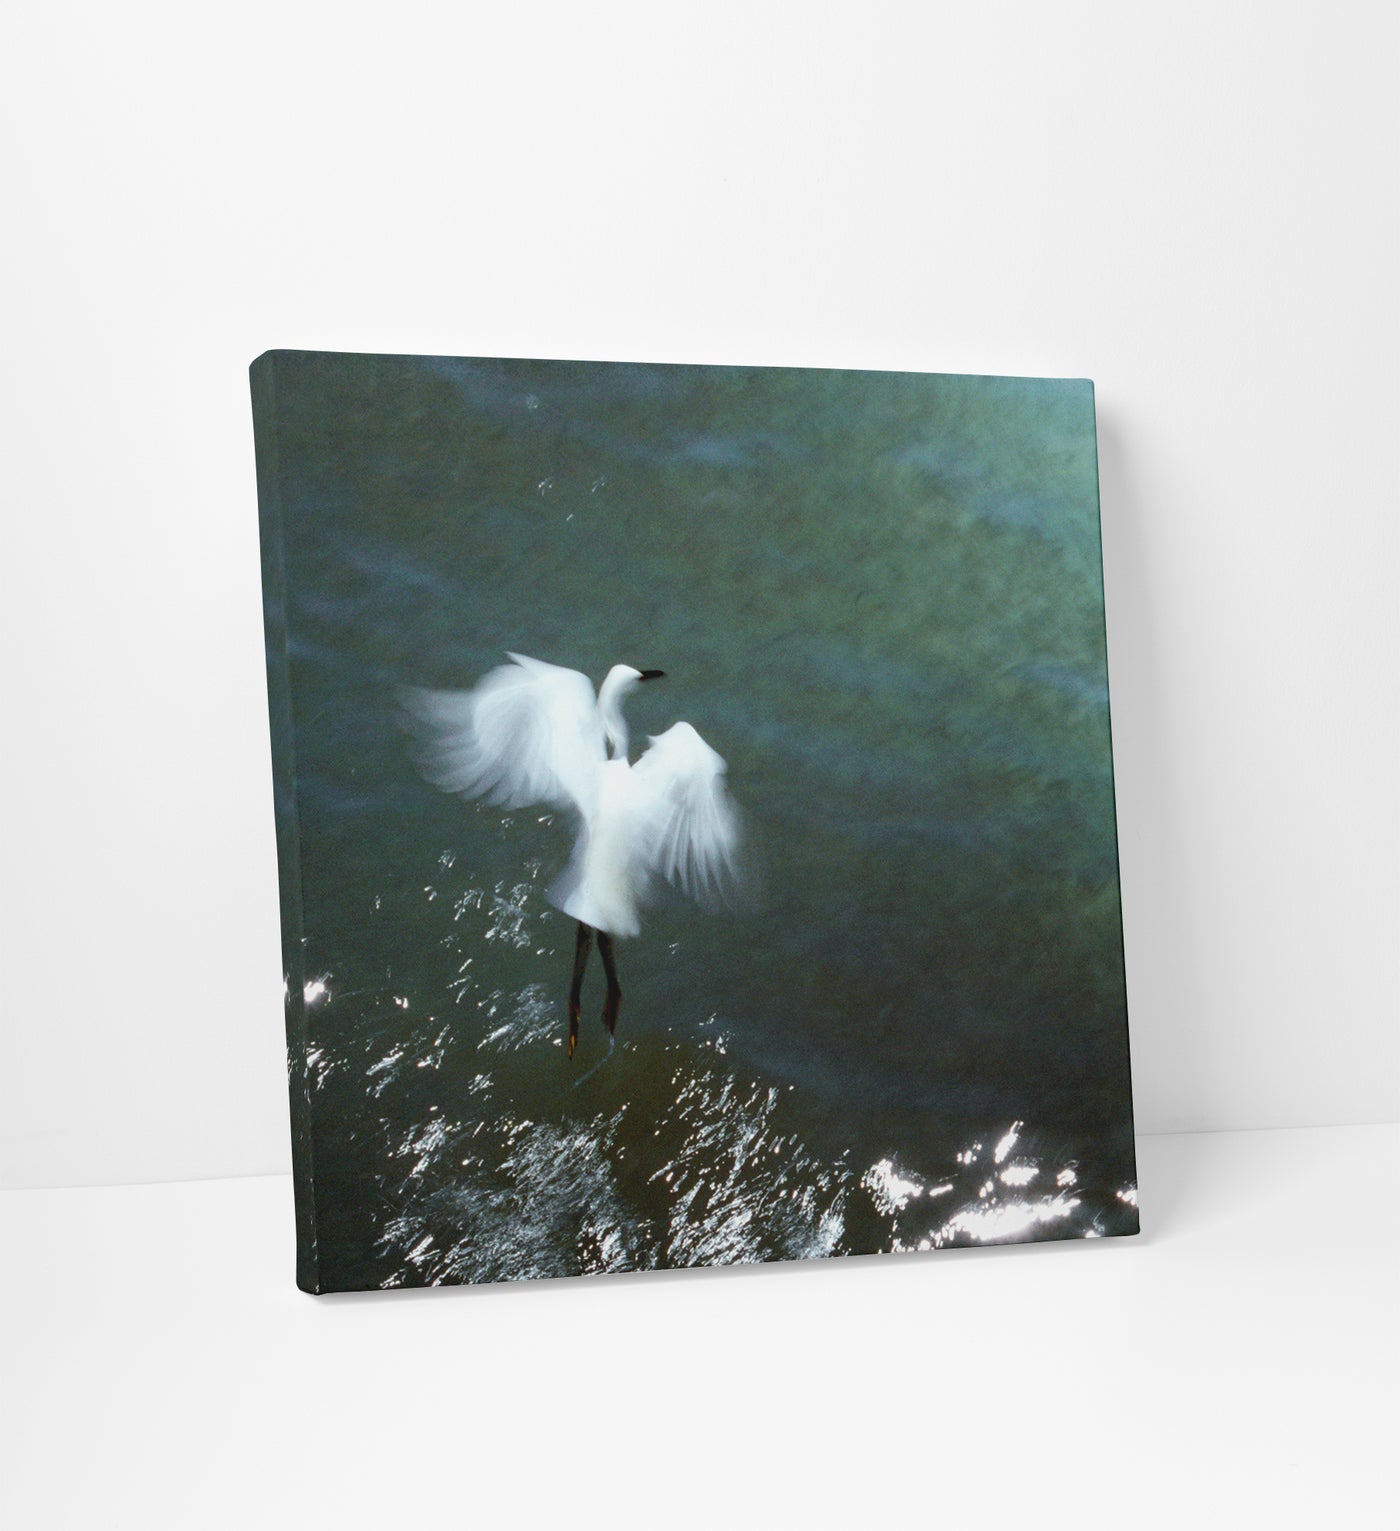 Fishing - Large bird photography art canvas by Cattie Coyle